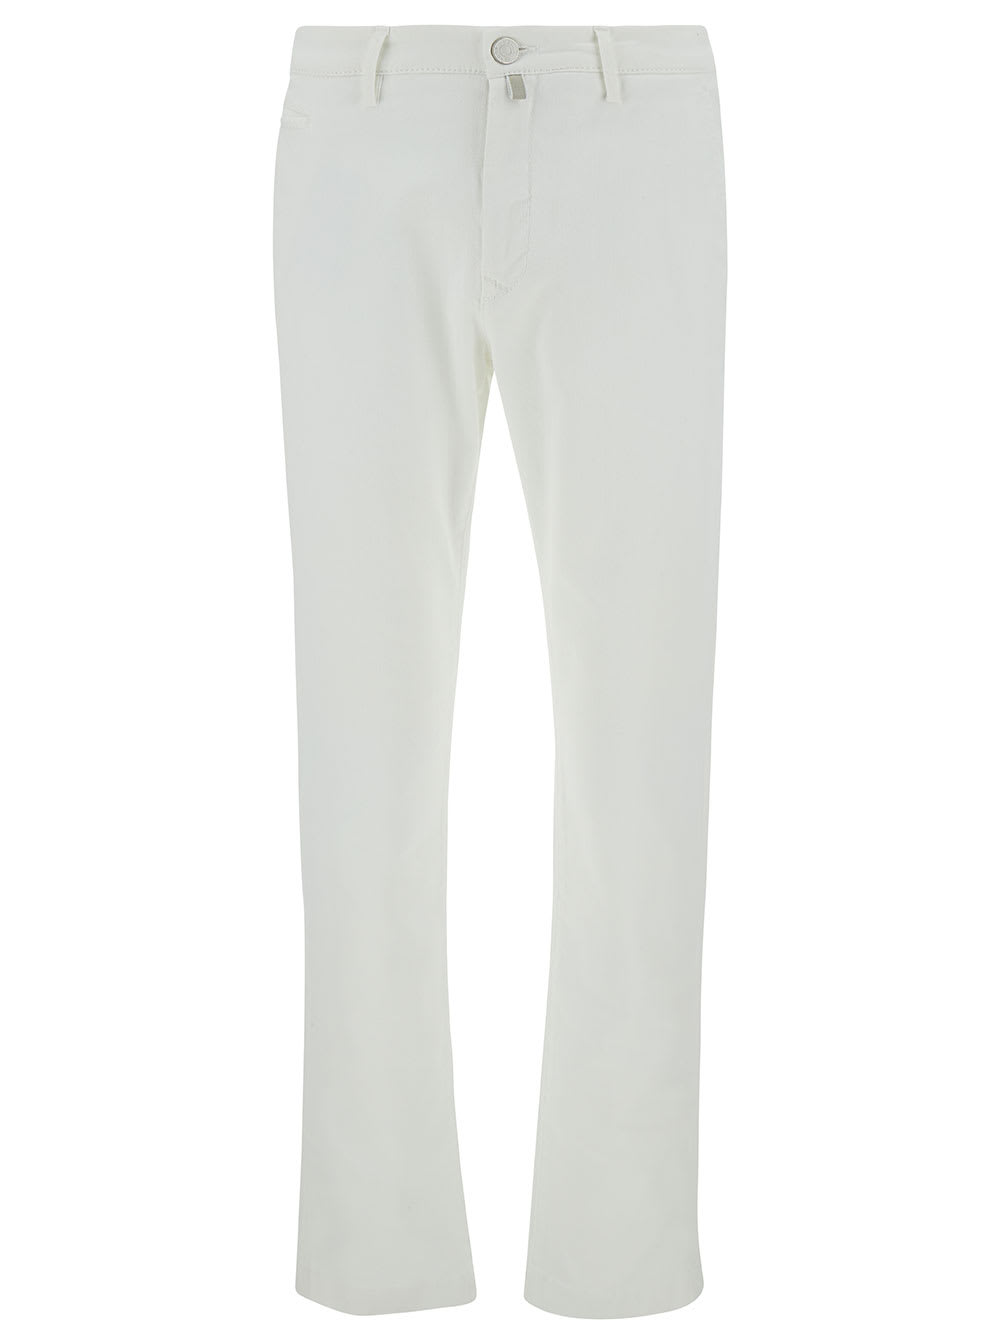 JACOB COHEN BOBBY SLIM WHITE PANTS WITH LOGO PATCH IN COTTON MAN